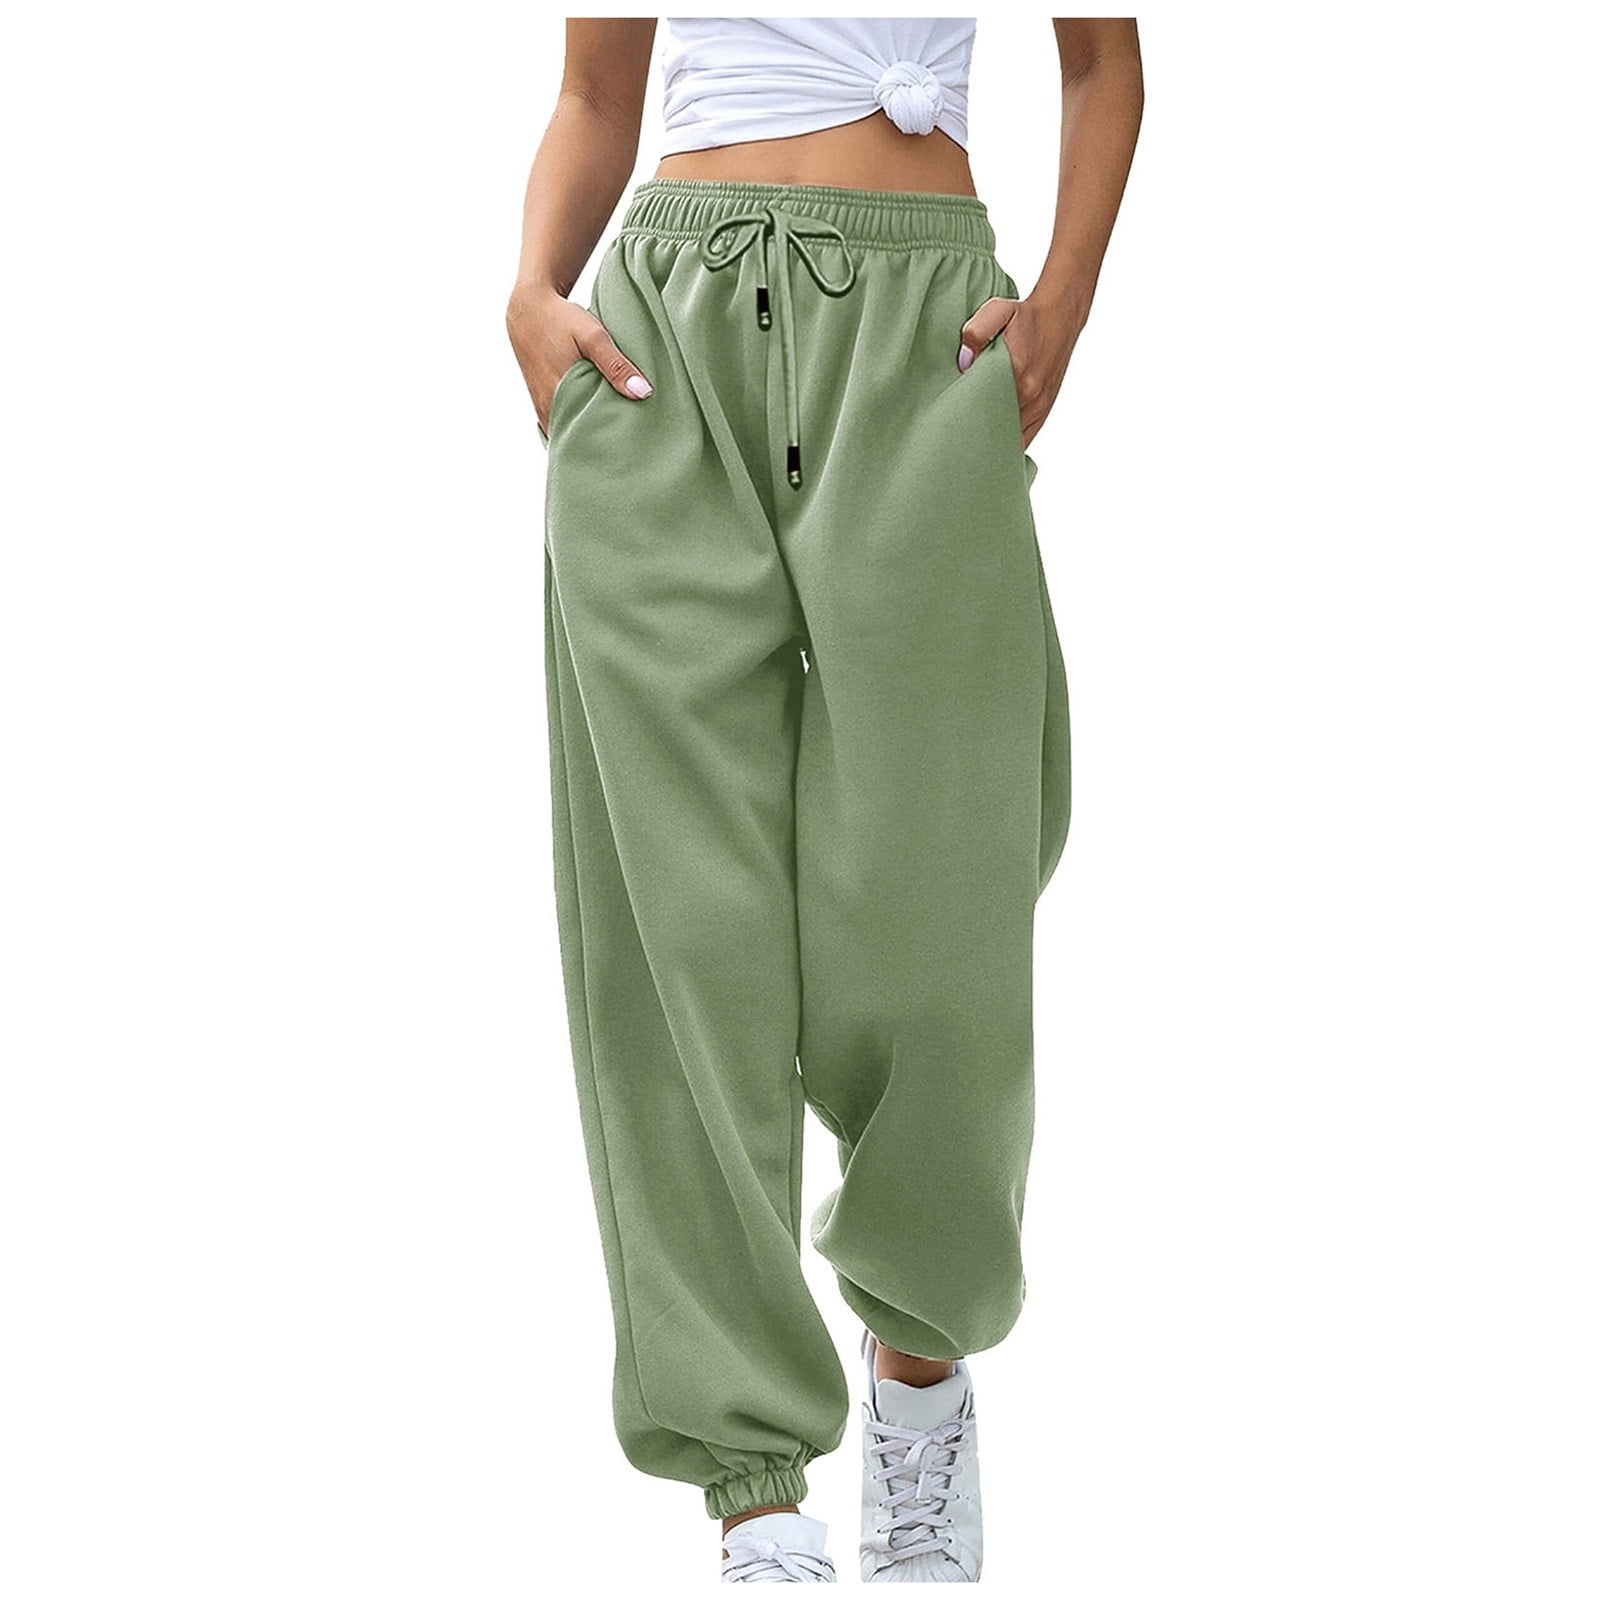 Qcmgmg Athletic Works Sweatpants Women High Waisted Casual Wide Leg Sweat  Pants for Women Drawstring Cinch Bottom Fashion Baggy Pants Fall Gym Trendy  Womens Joggers with Pockets Dark Green L 